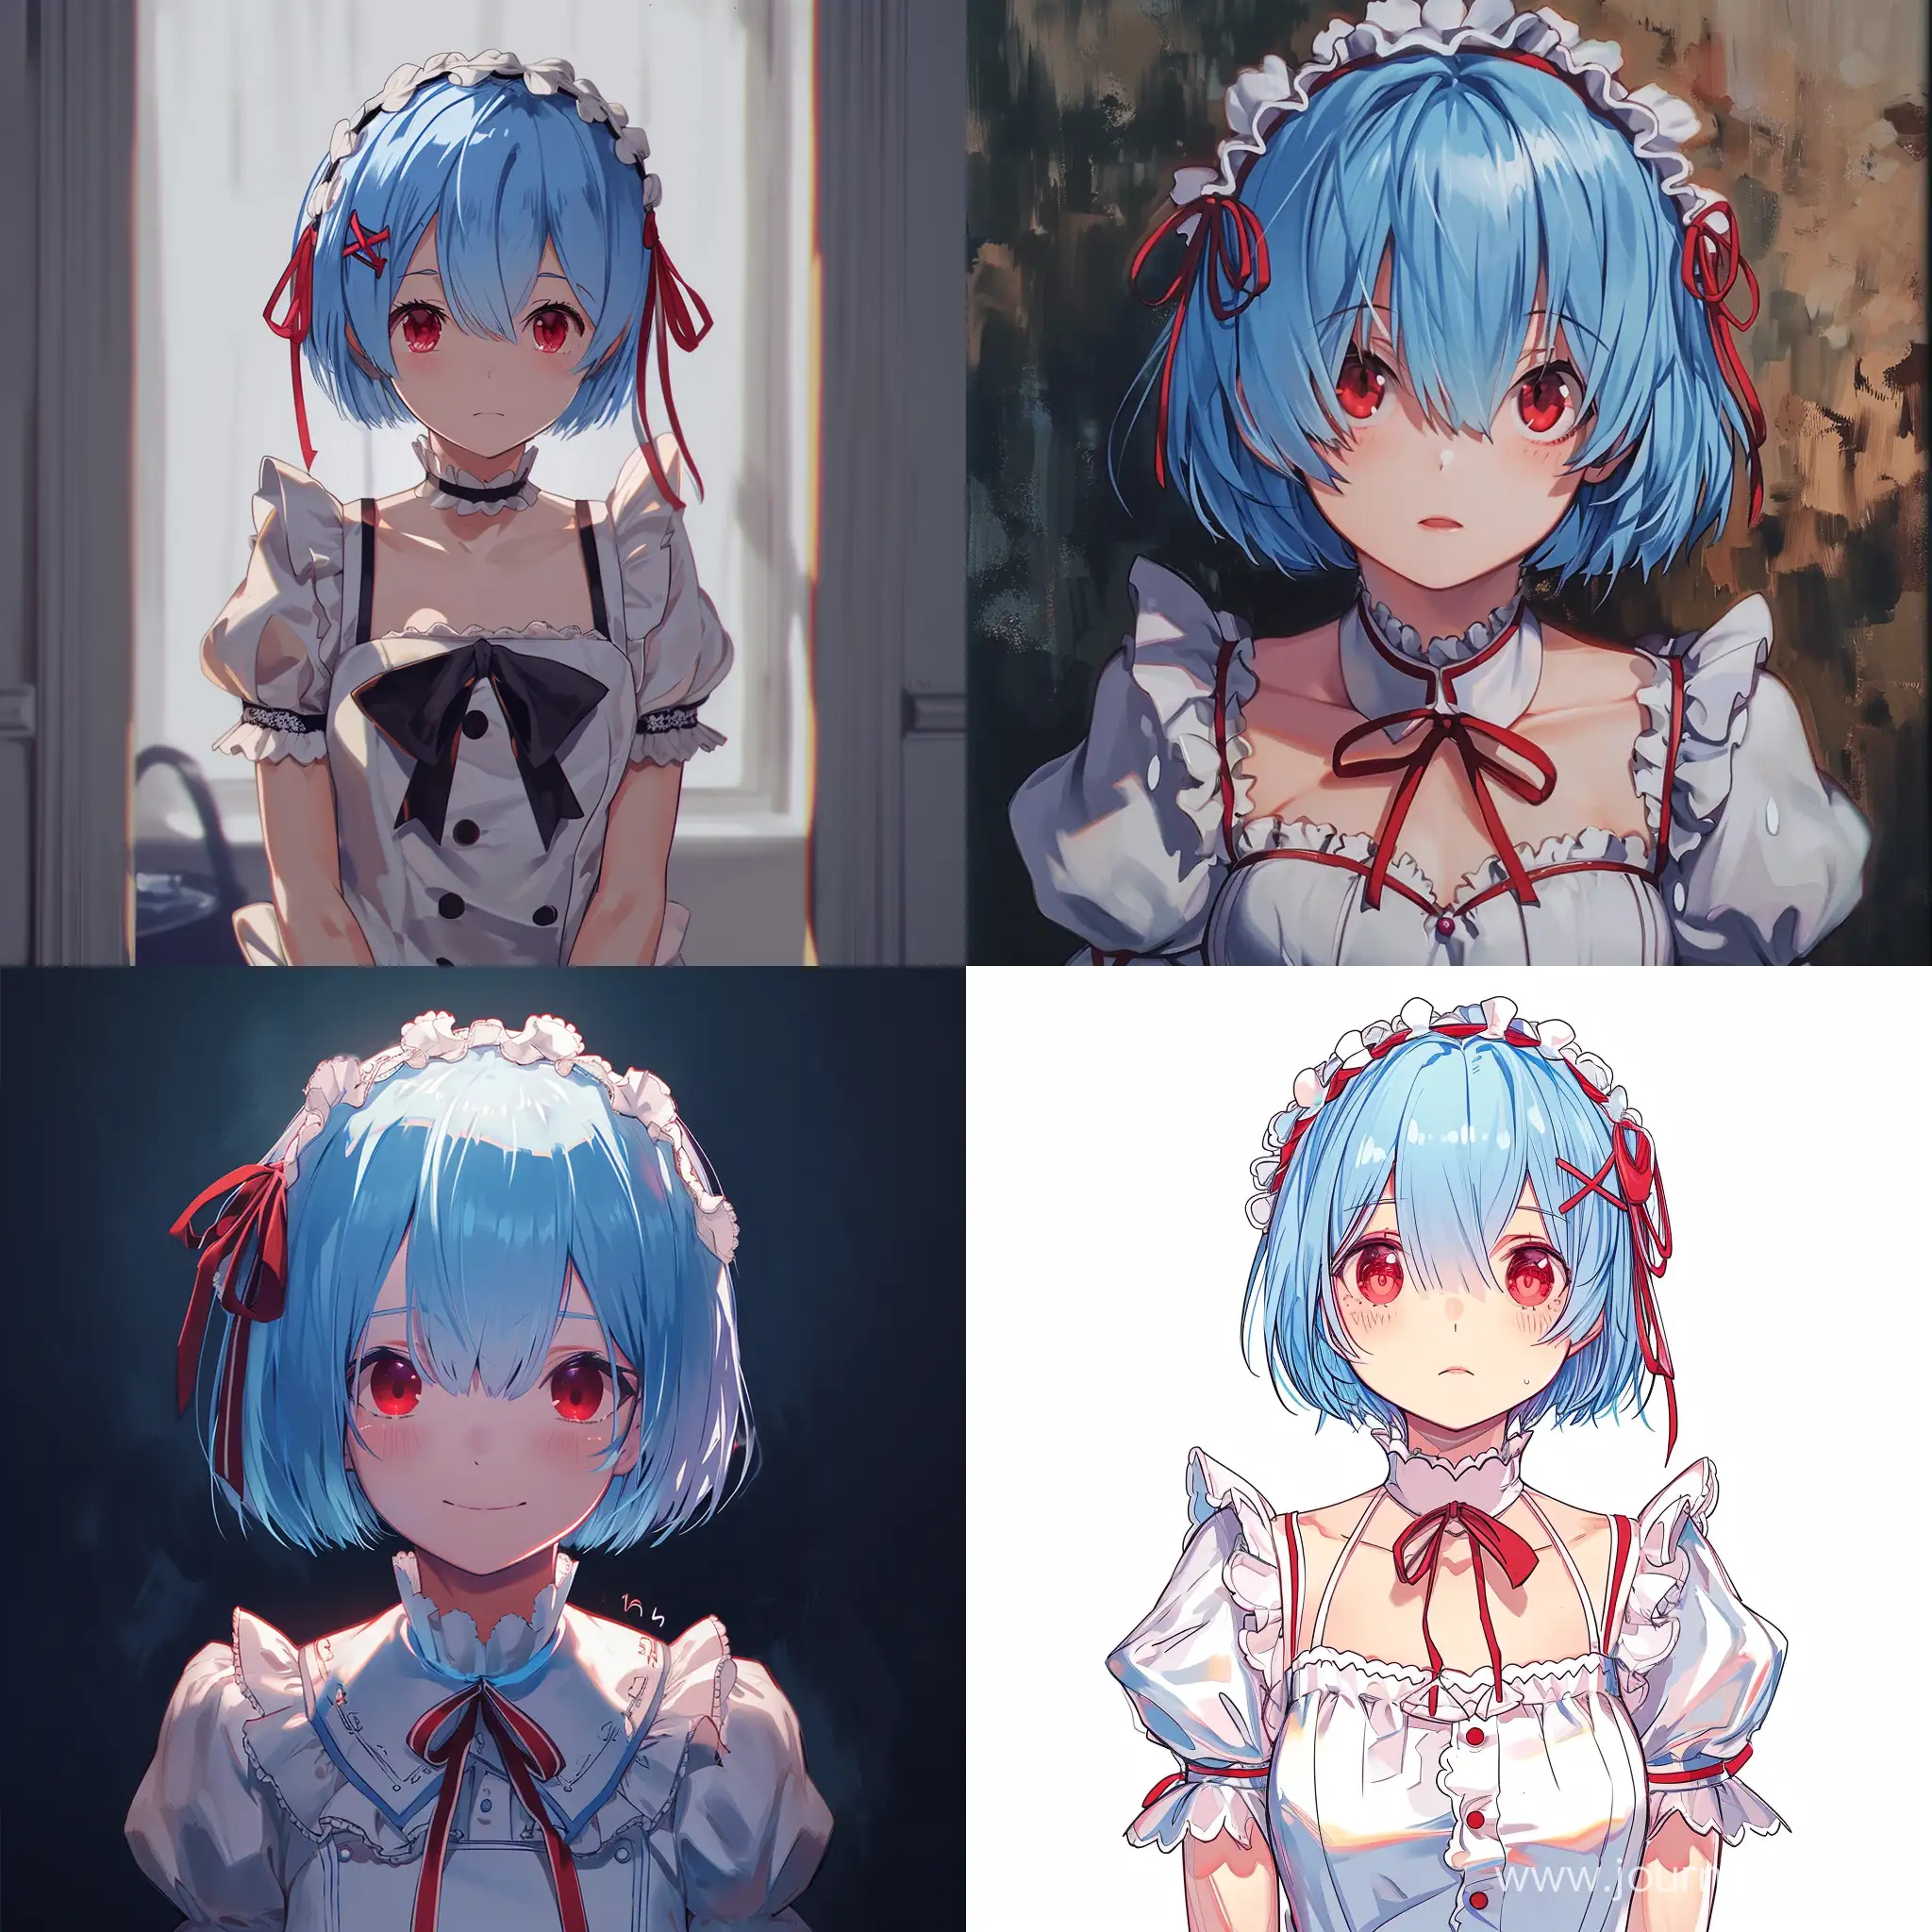 Cute-Anime-Maid-Rem-with-Sky-Blue-Hair-and-Red-Eyes